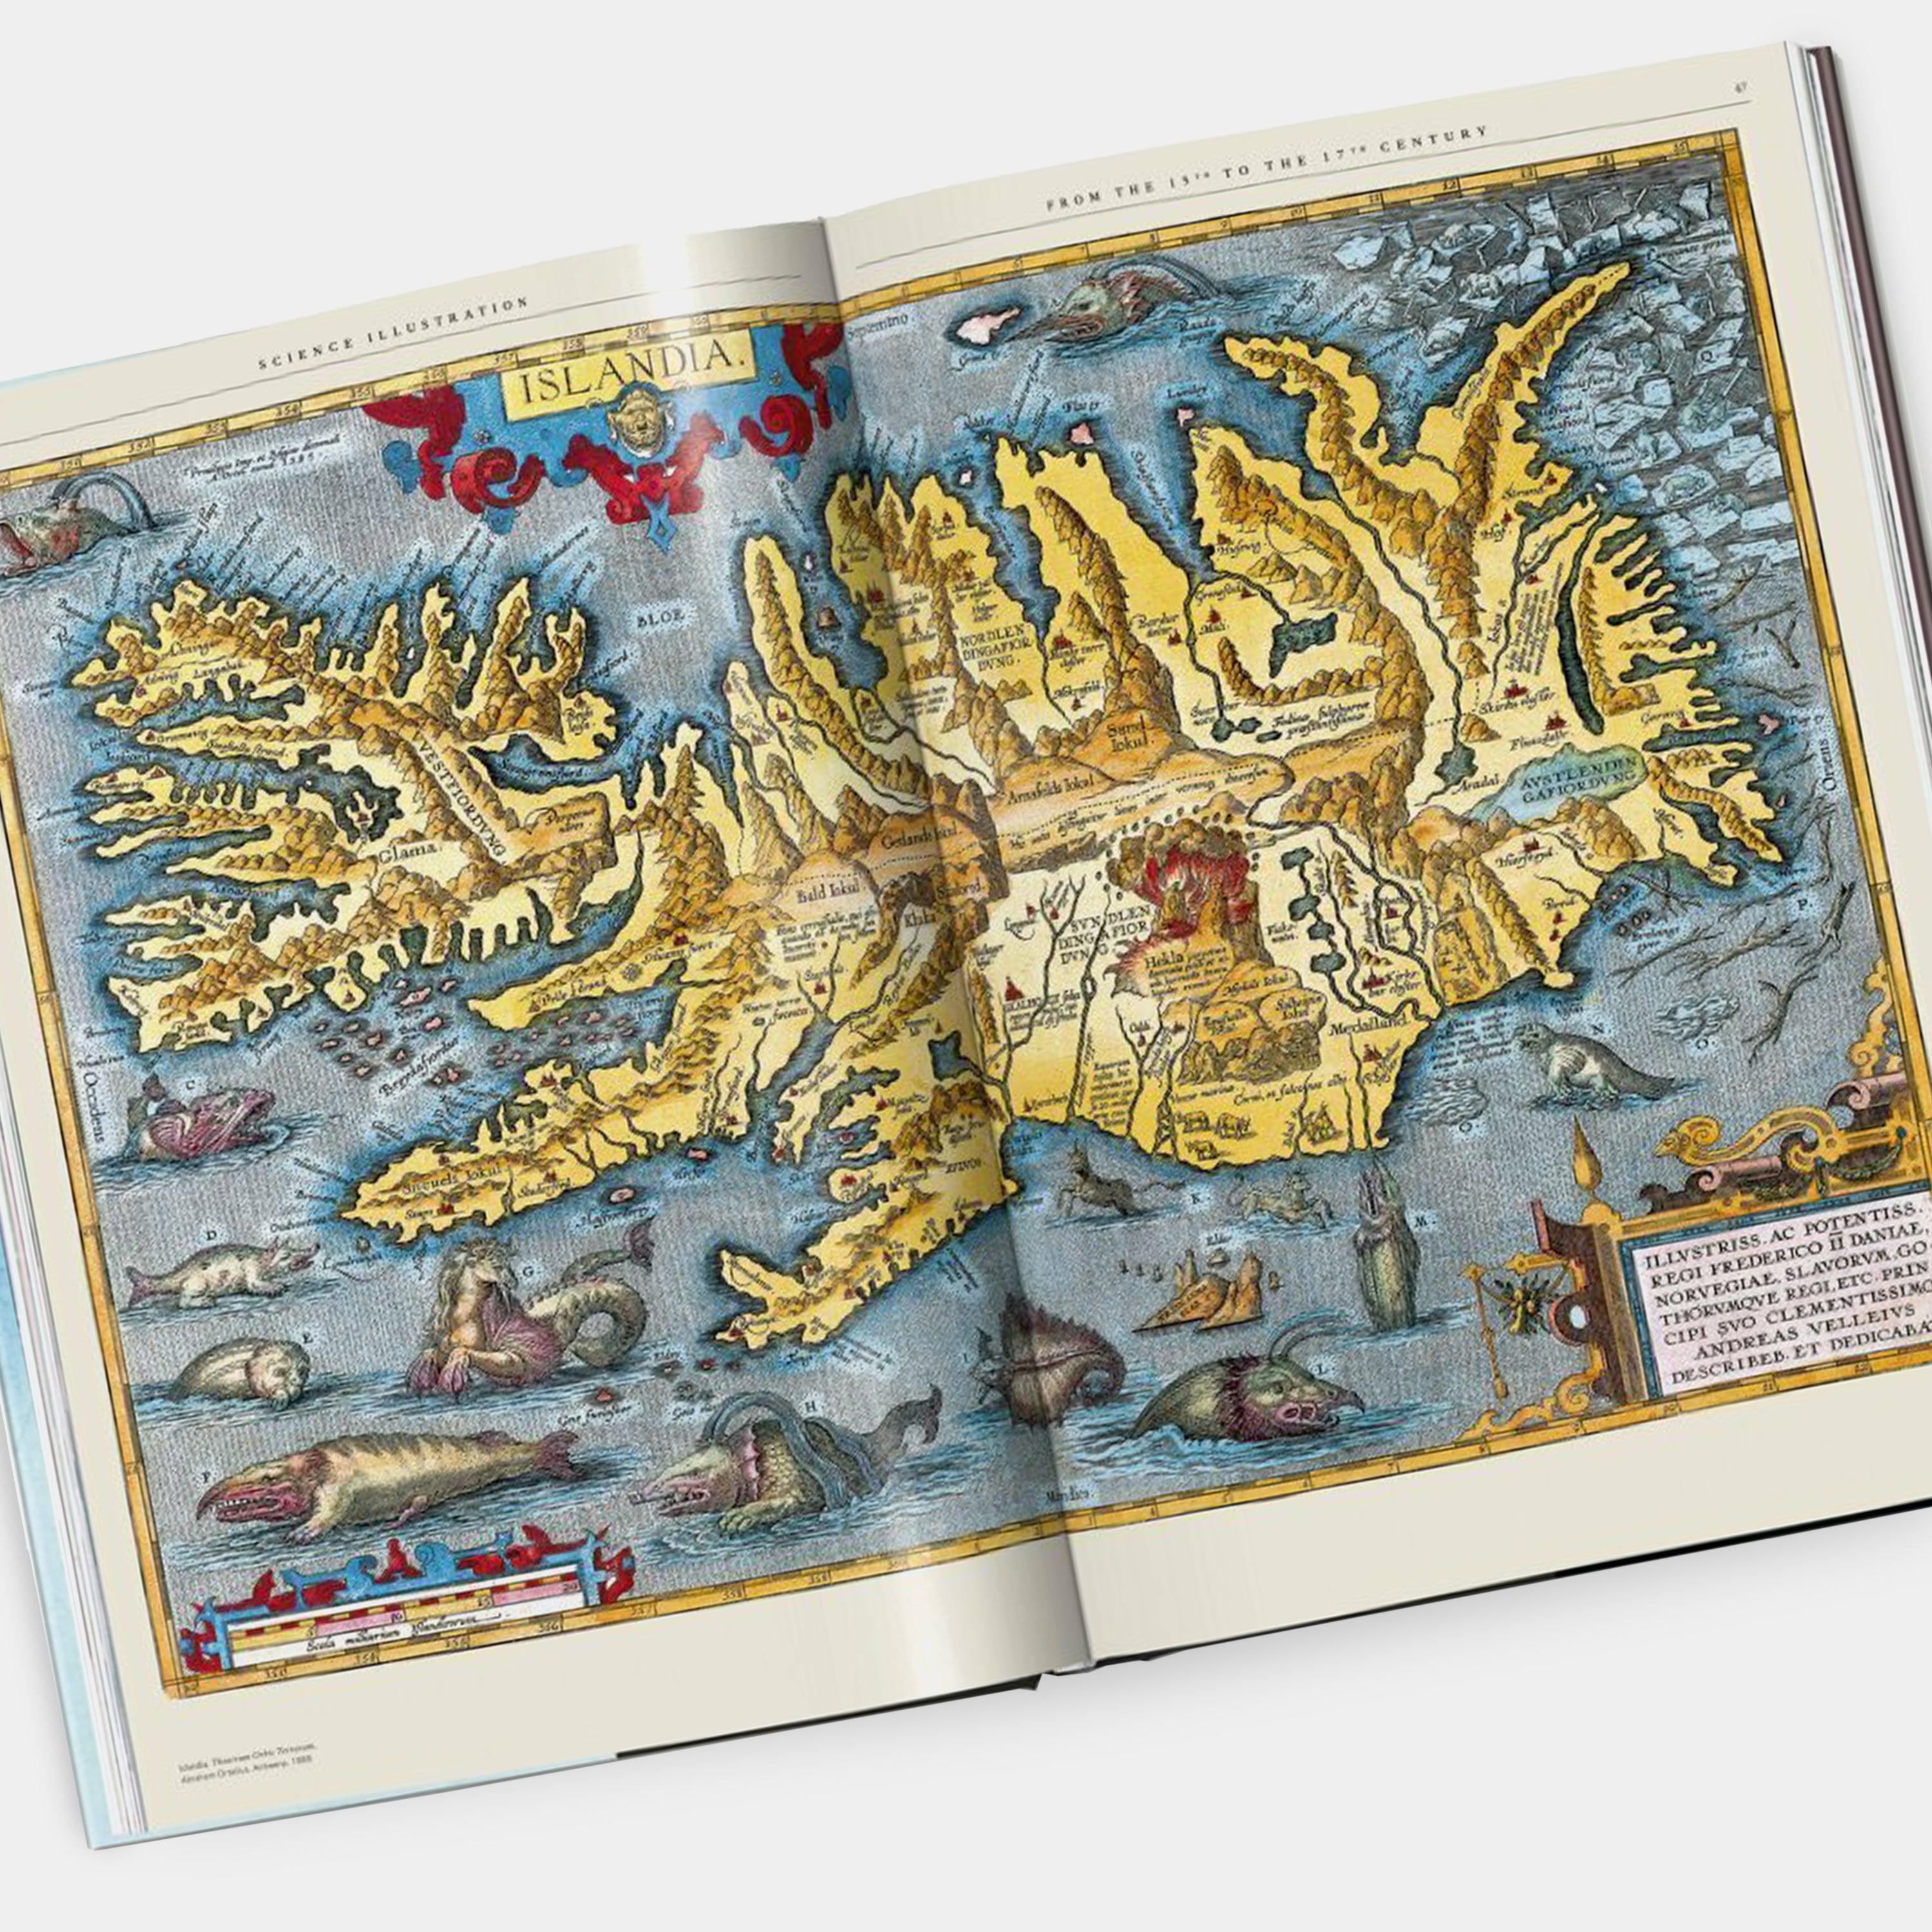 Science Illustration. A History of Visual Knowledge from the 15th Century to Today XL Taschen Book